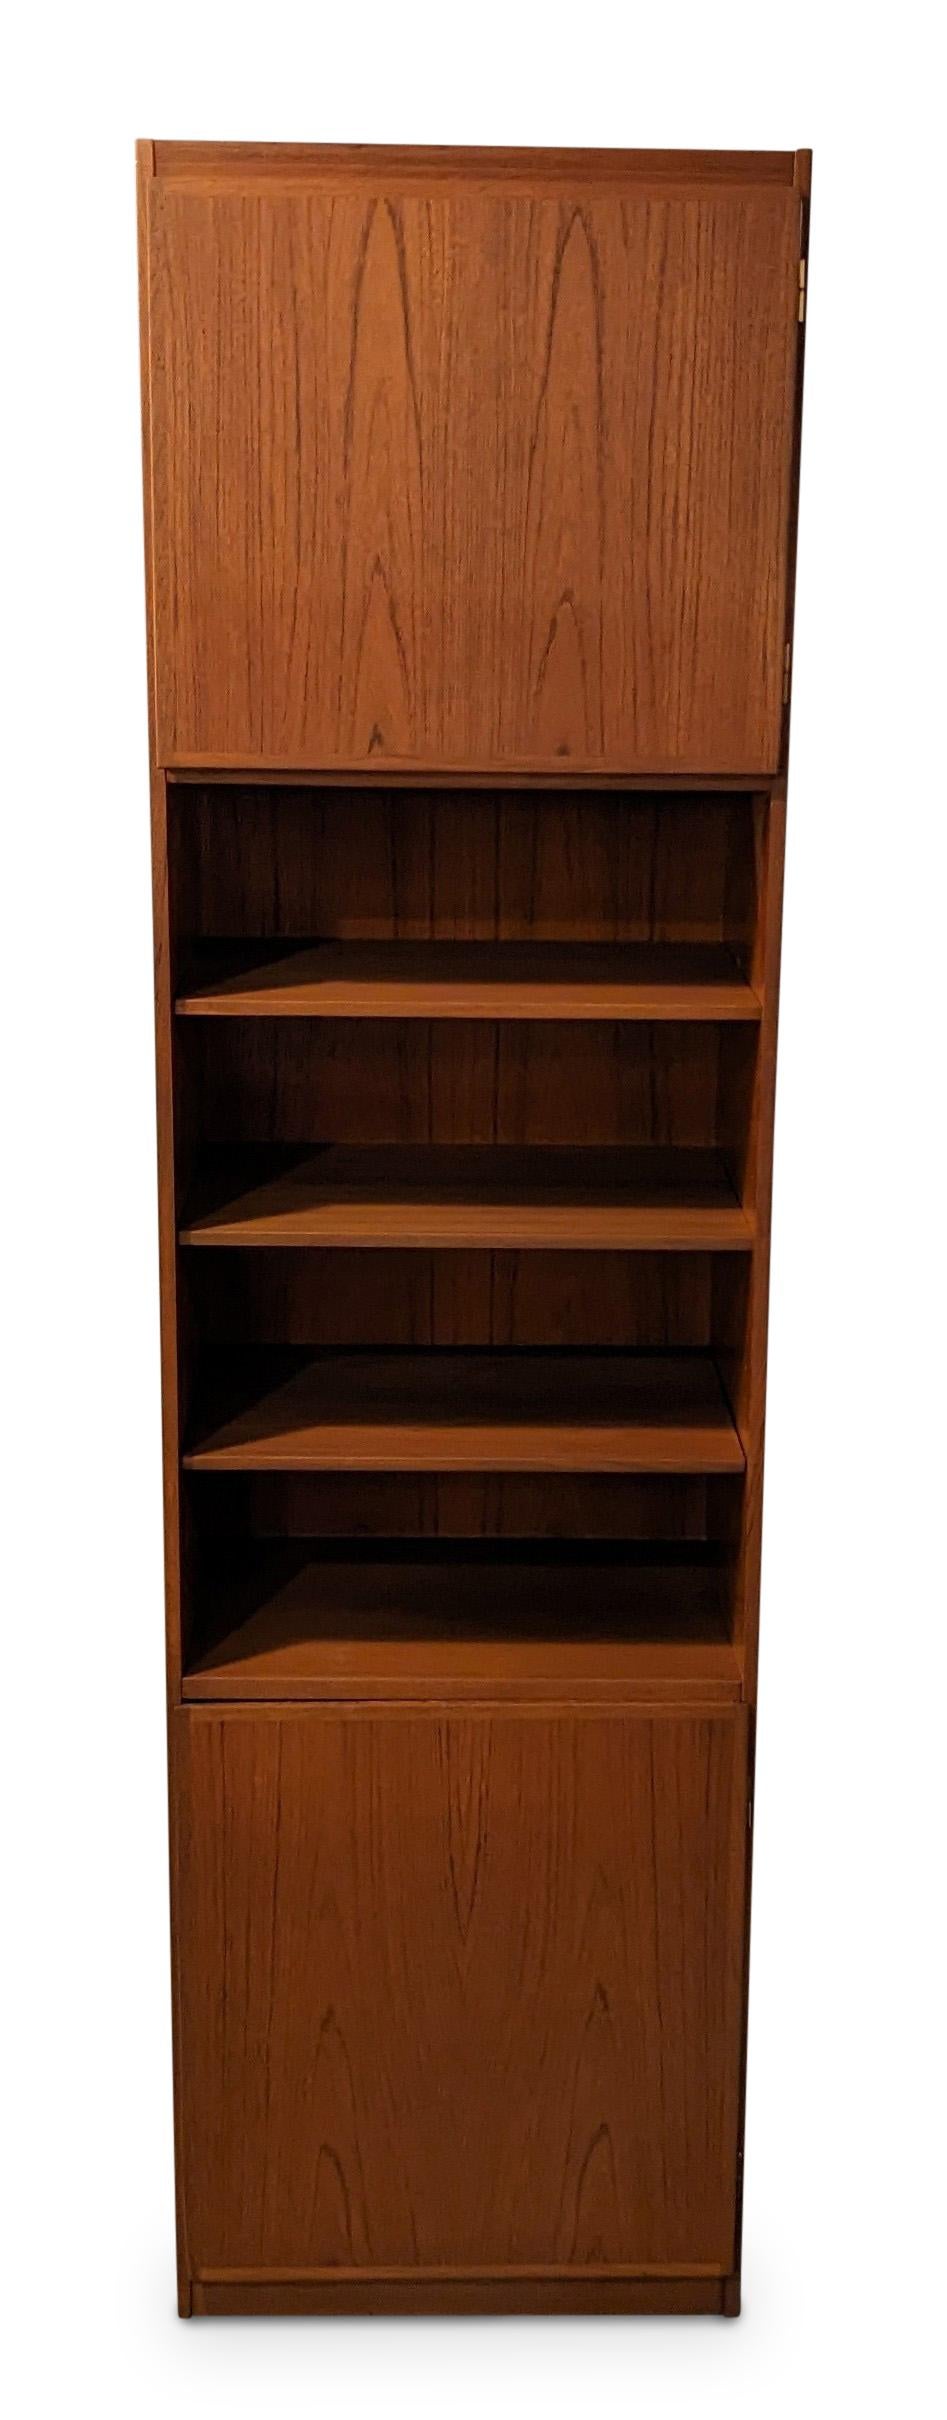 Tall Omann Jun Teak Bookcase - 0823183 Vintage Danish Mid Century  In Good Condition For Sale In Brooklyn, NY